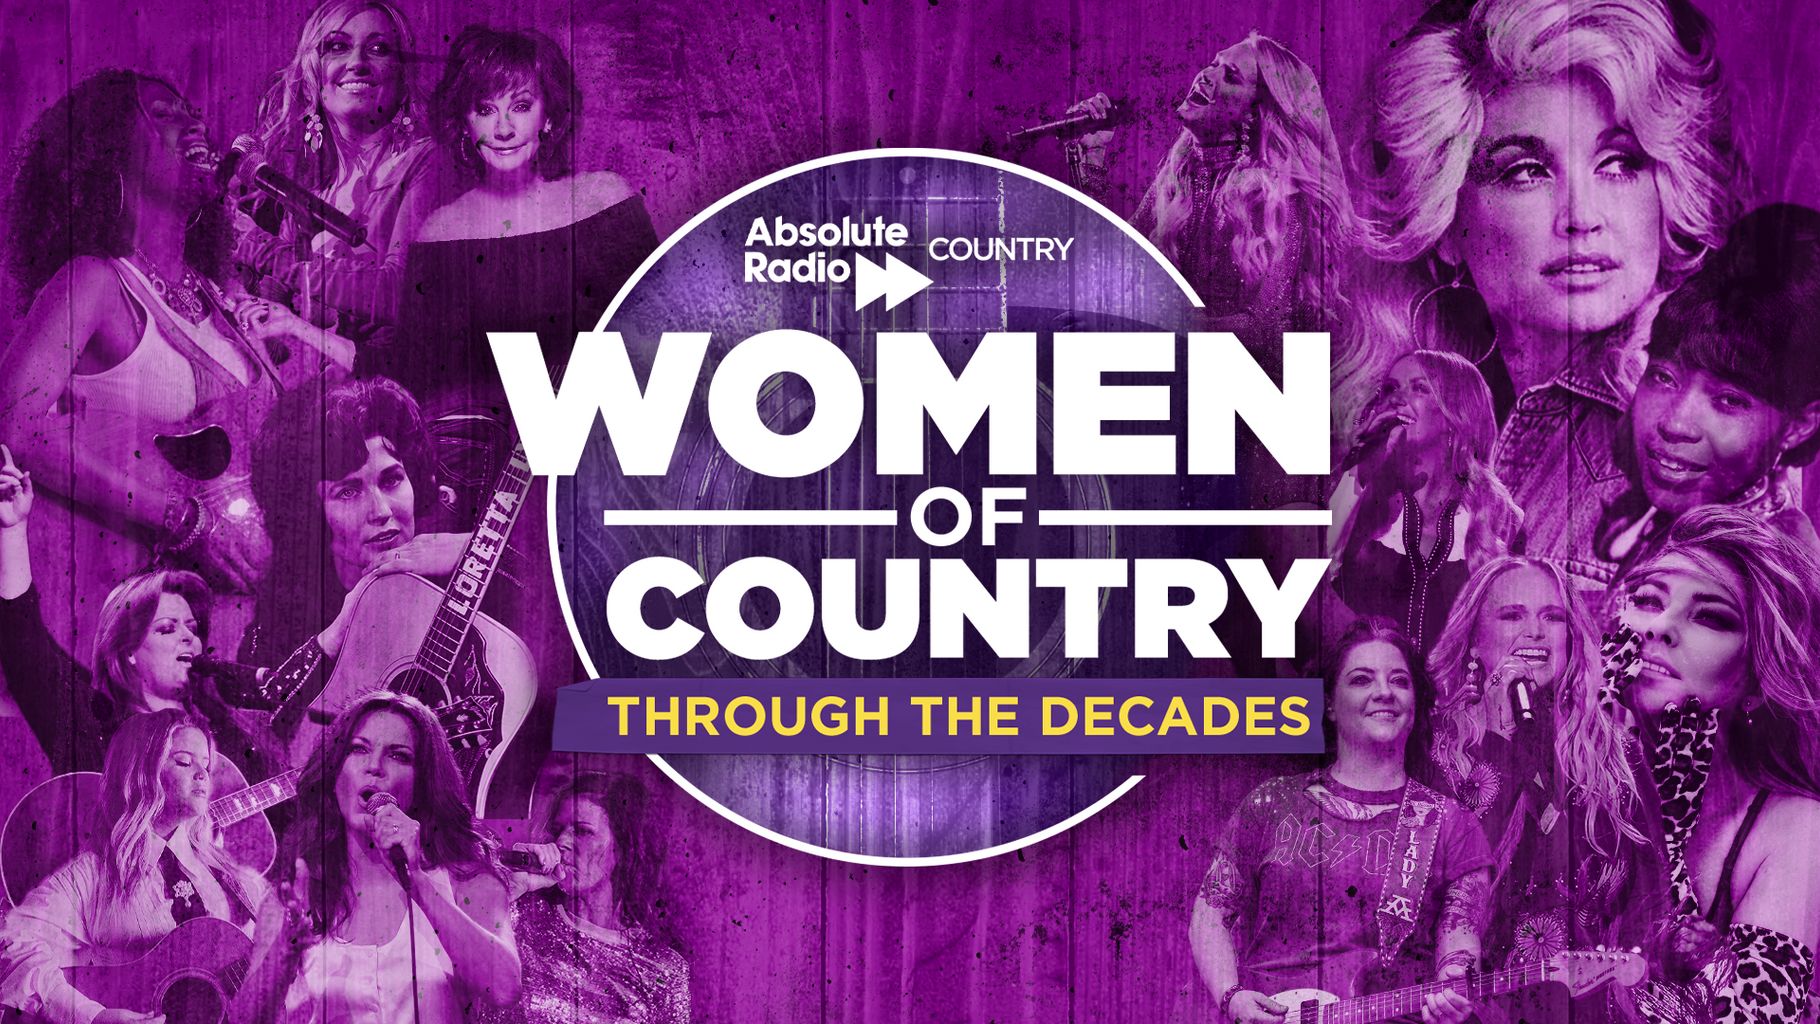 Country Hits by Women: From Lee Ann Womack to Maren Morris